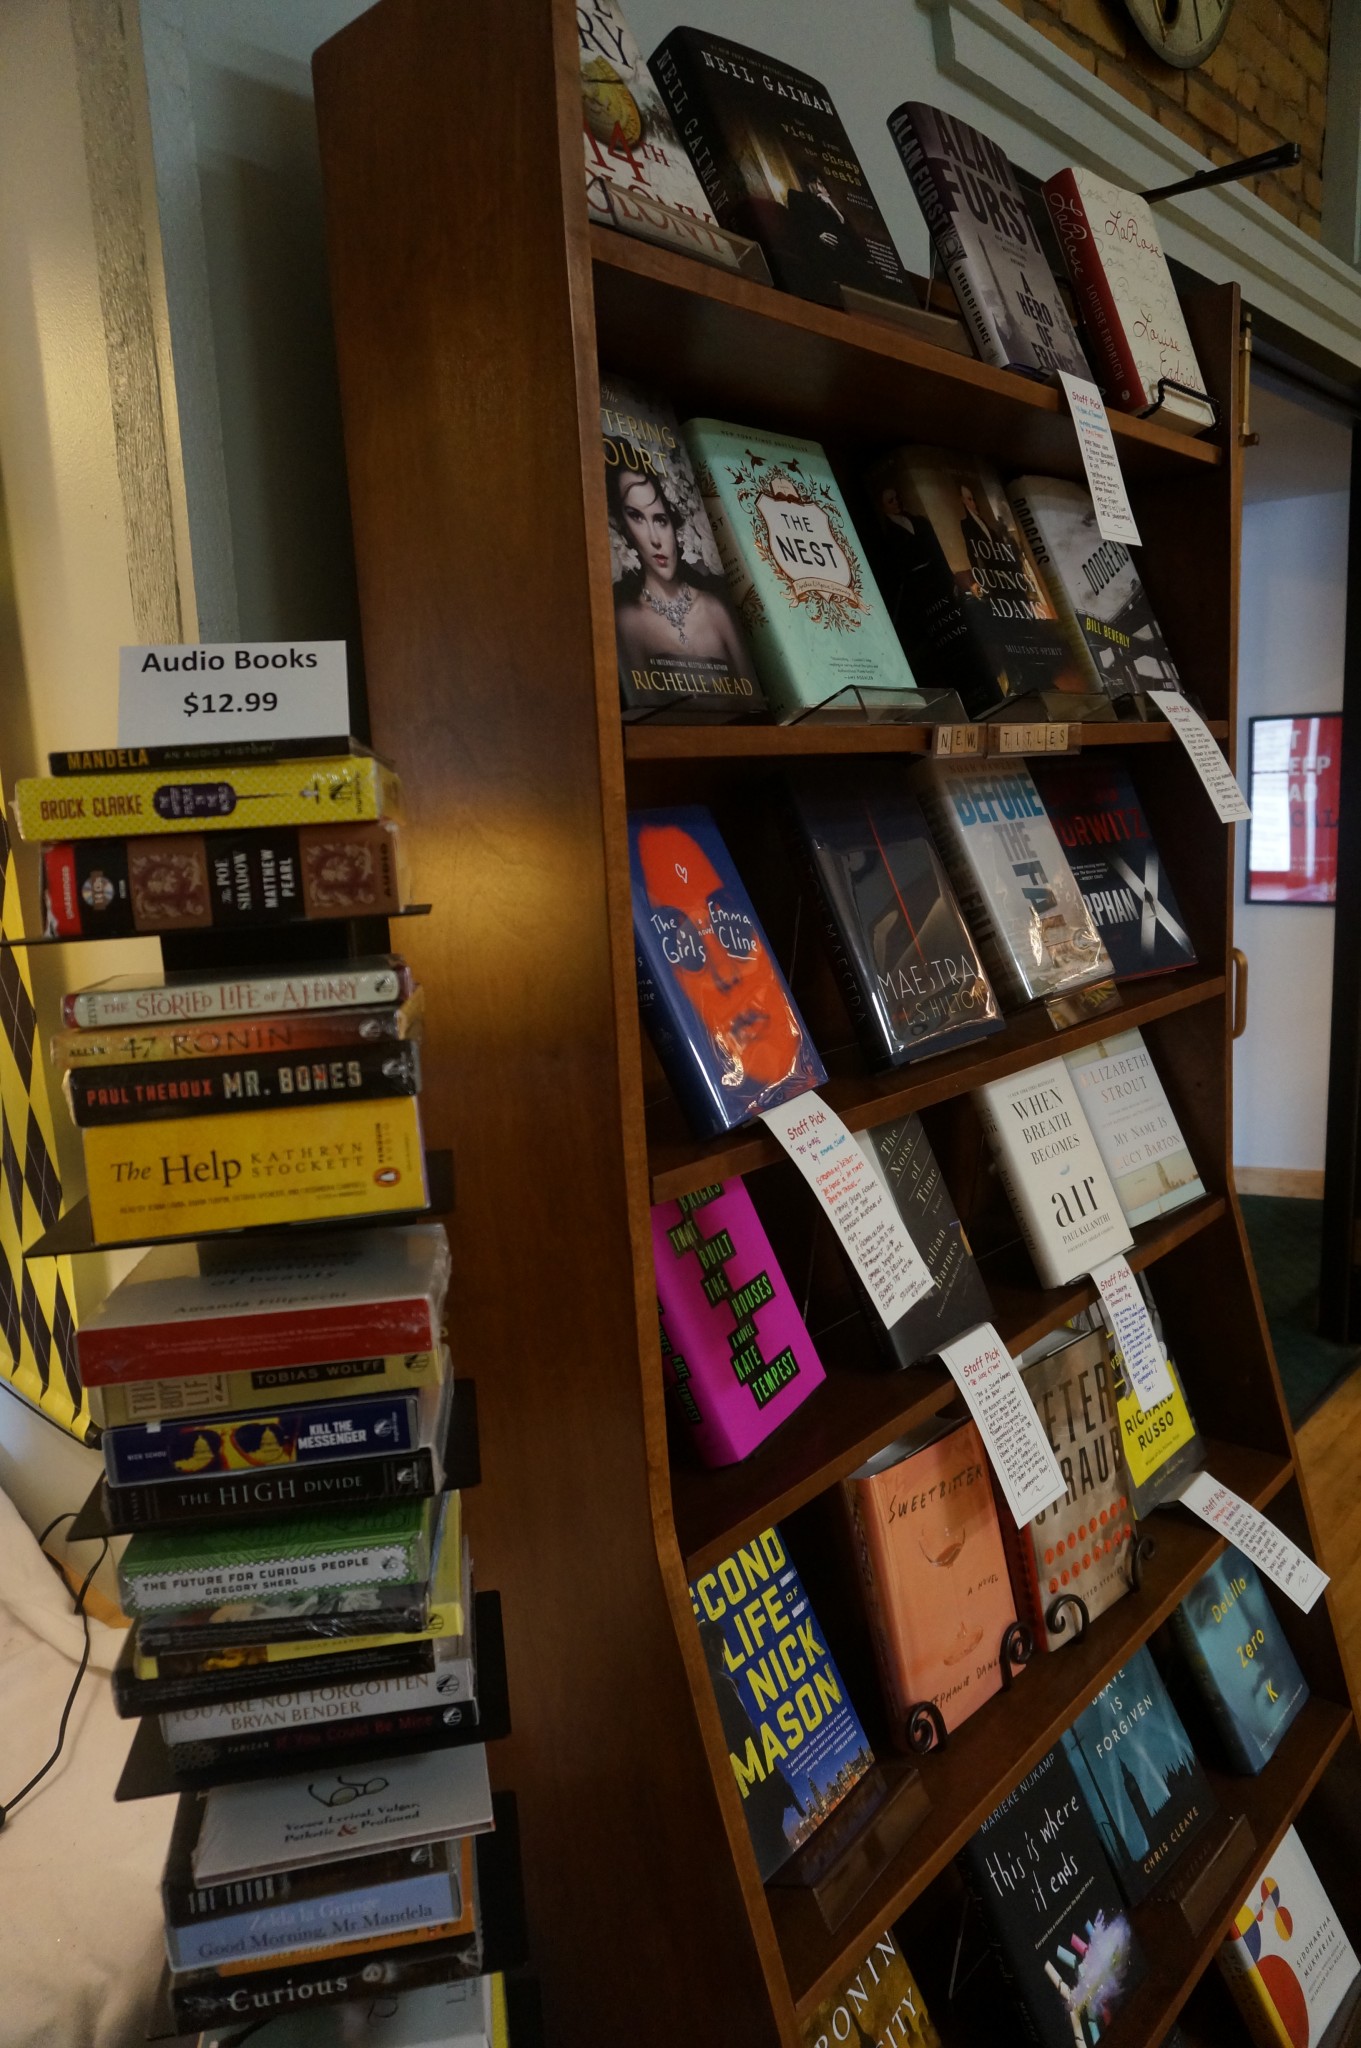 Recommended books are put on display in the bookstore.